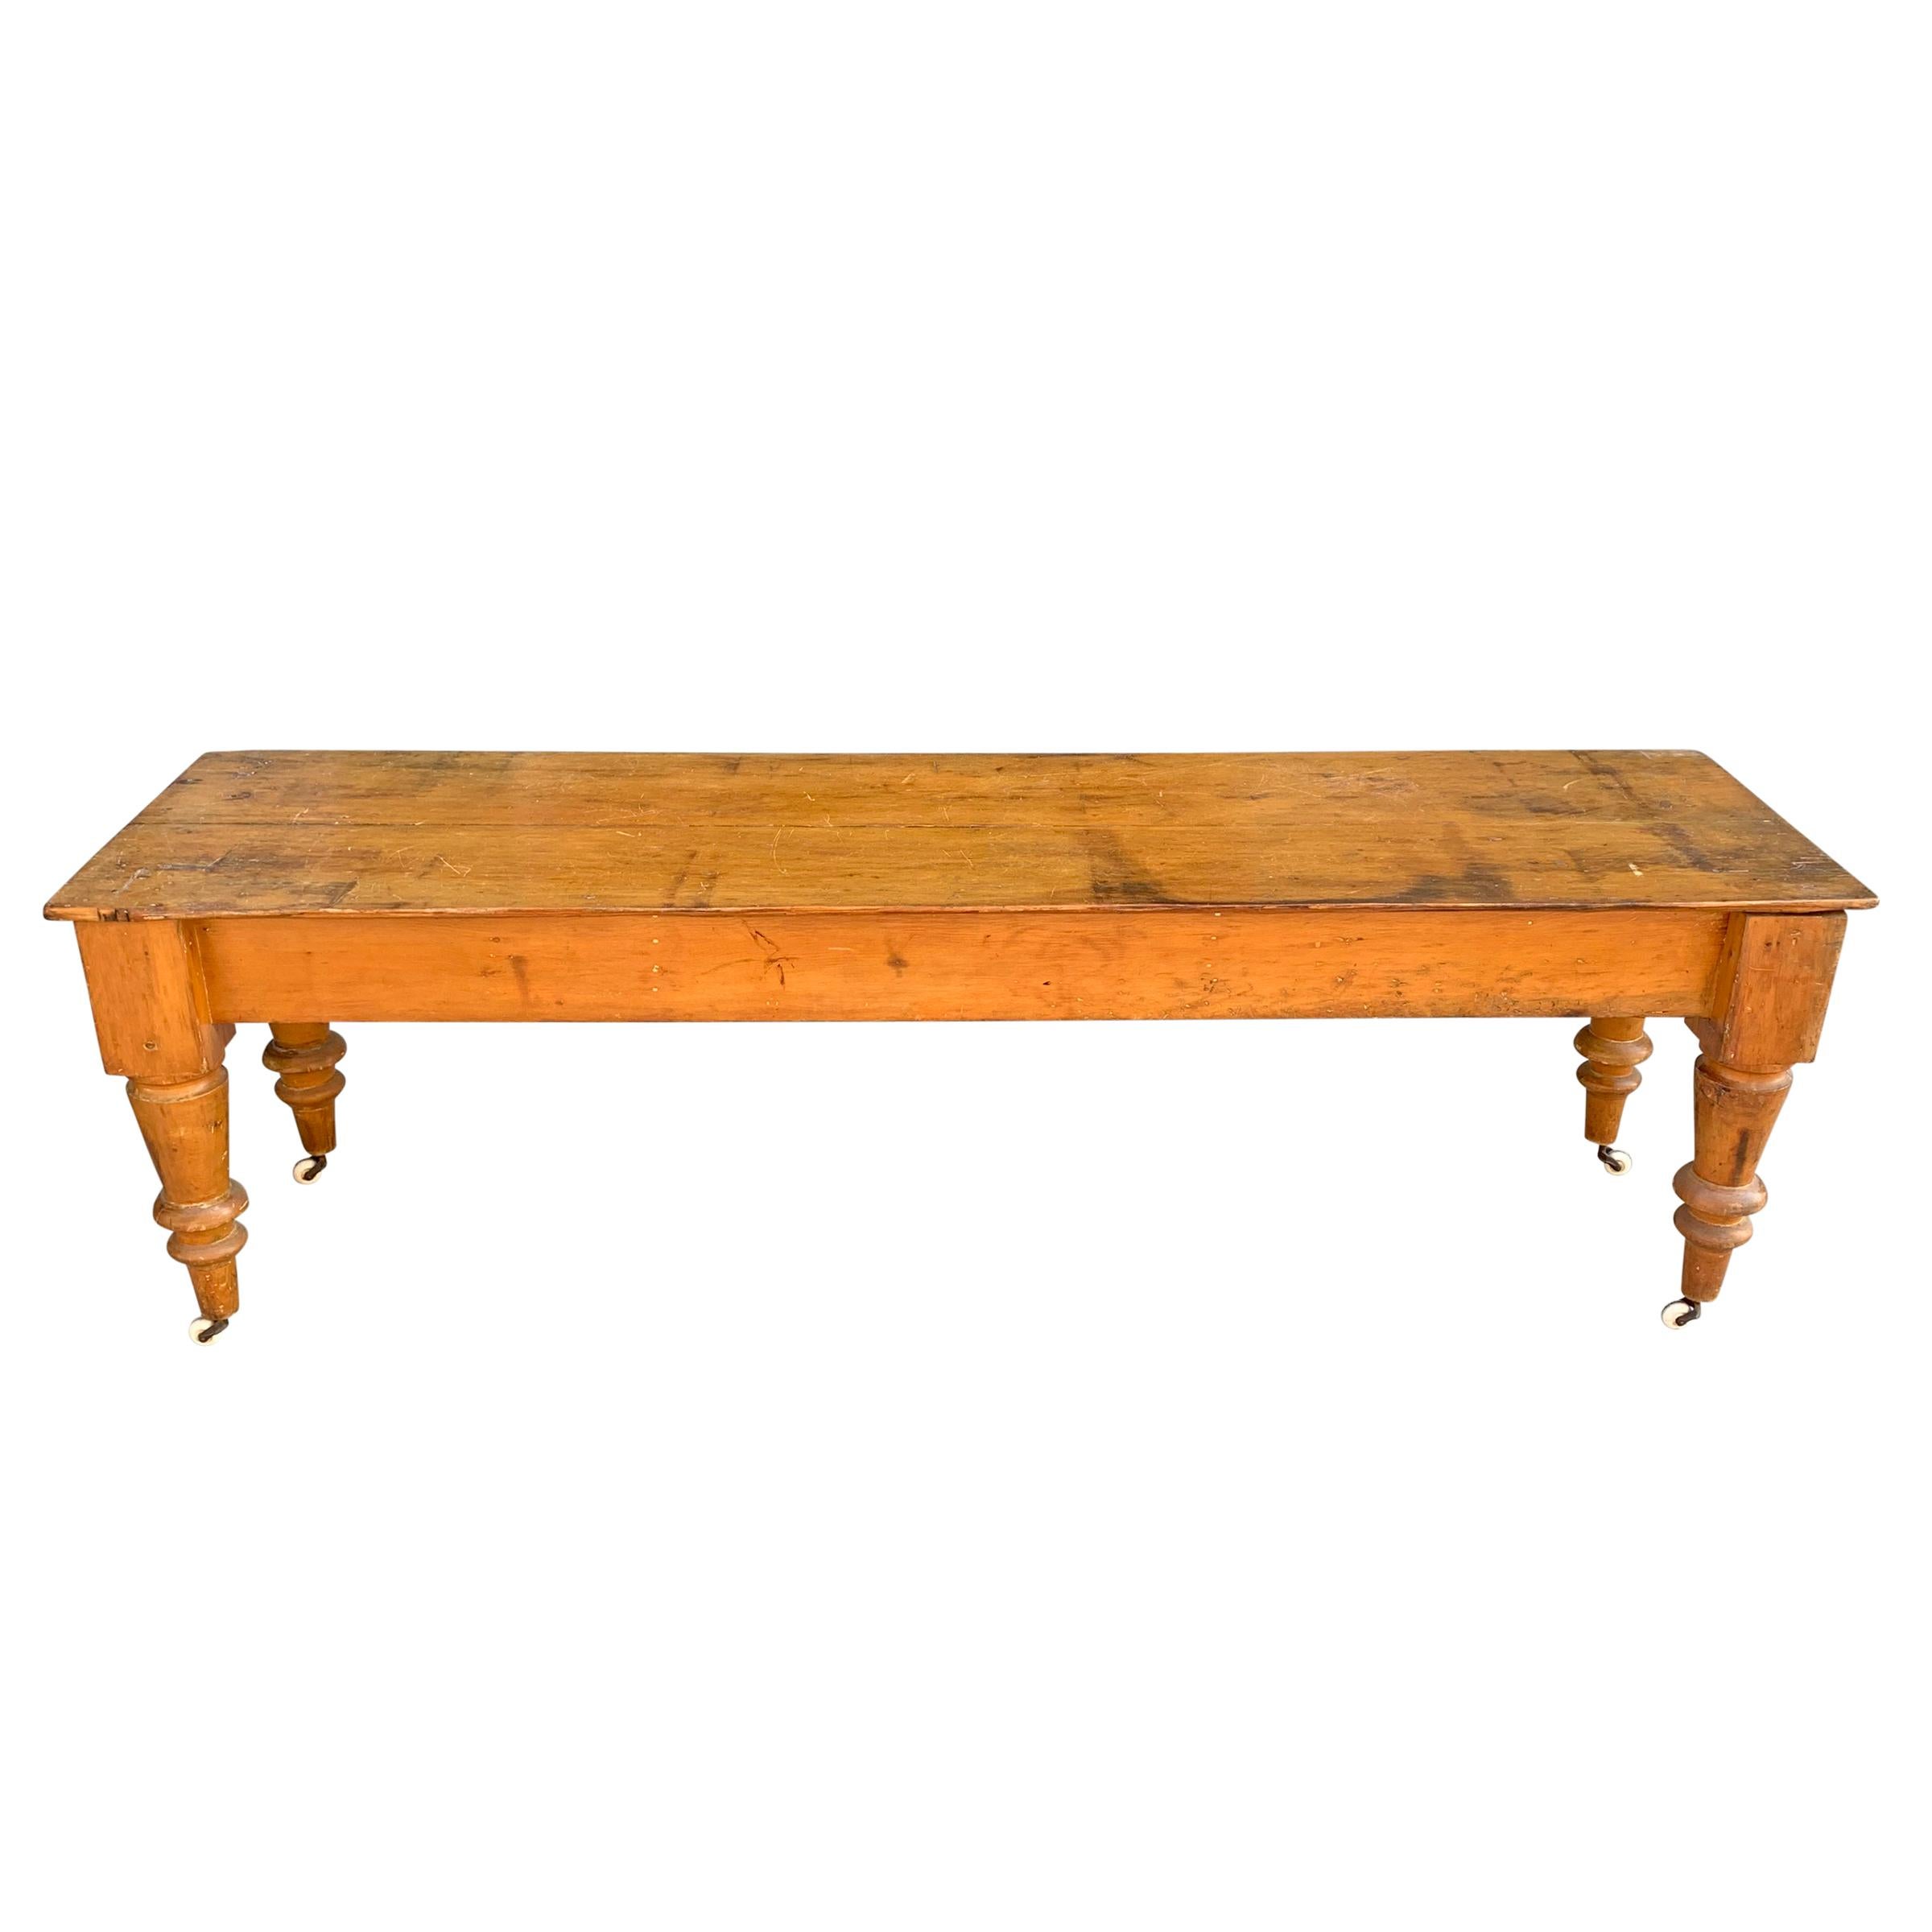 Rustic 19th Century American Harvest Table with Turned Legs